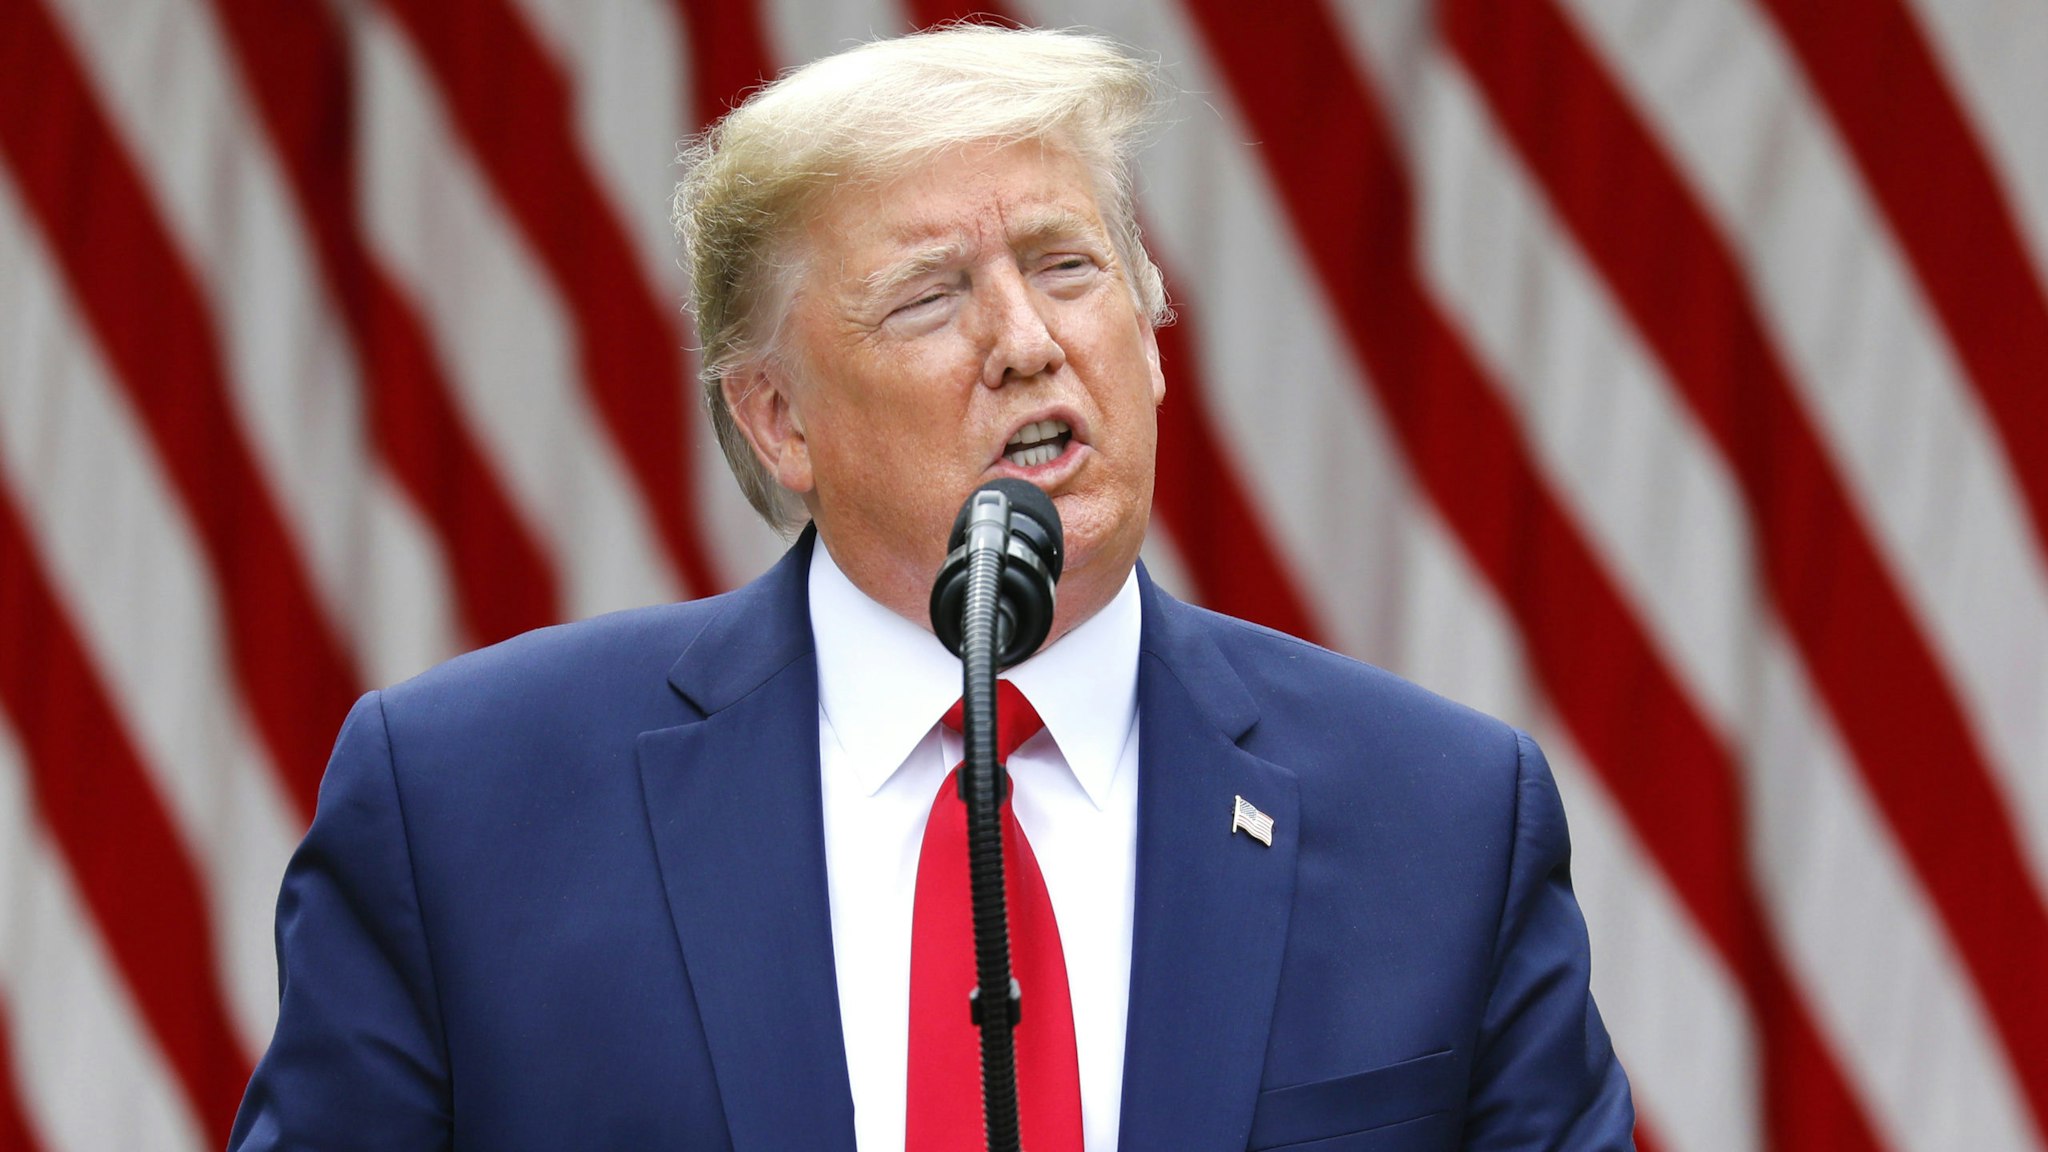 U.S. President Donald Trump speaks during a news conference with members of his administration in the Rose Garden of the White House in Washington, D.C., U.S., on Friday, May 29, 2020. Trump said the U.S. will terminate its relationship with the World Health Organization, which he has accused of being under Chinese control and failing to provide accurate information about the spread of coronavirus.